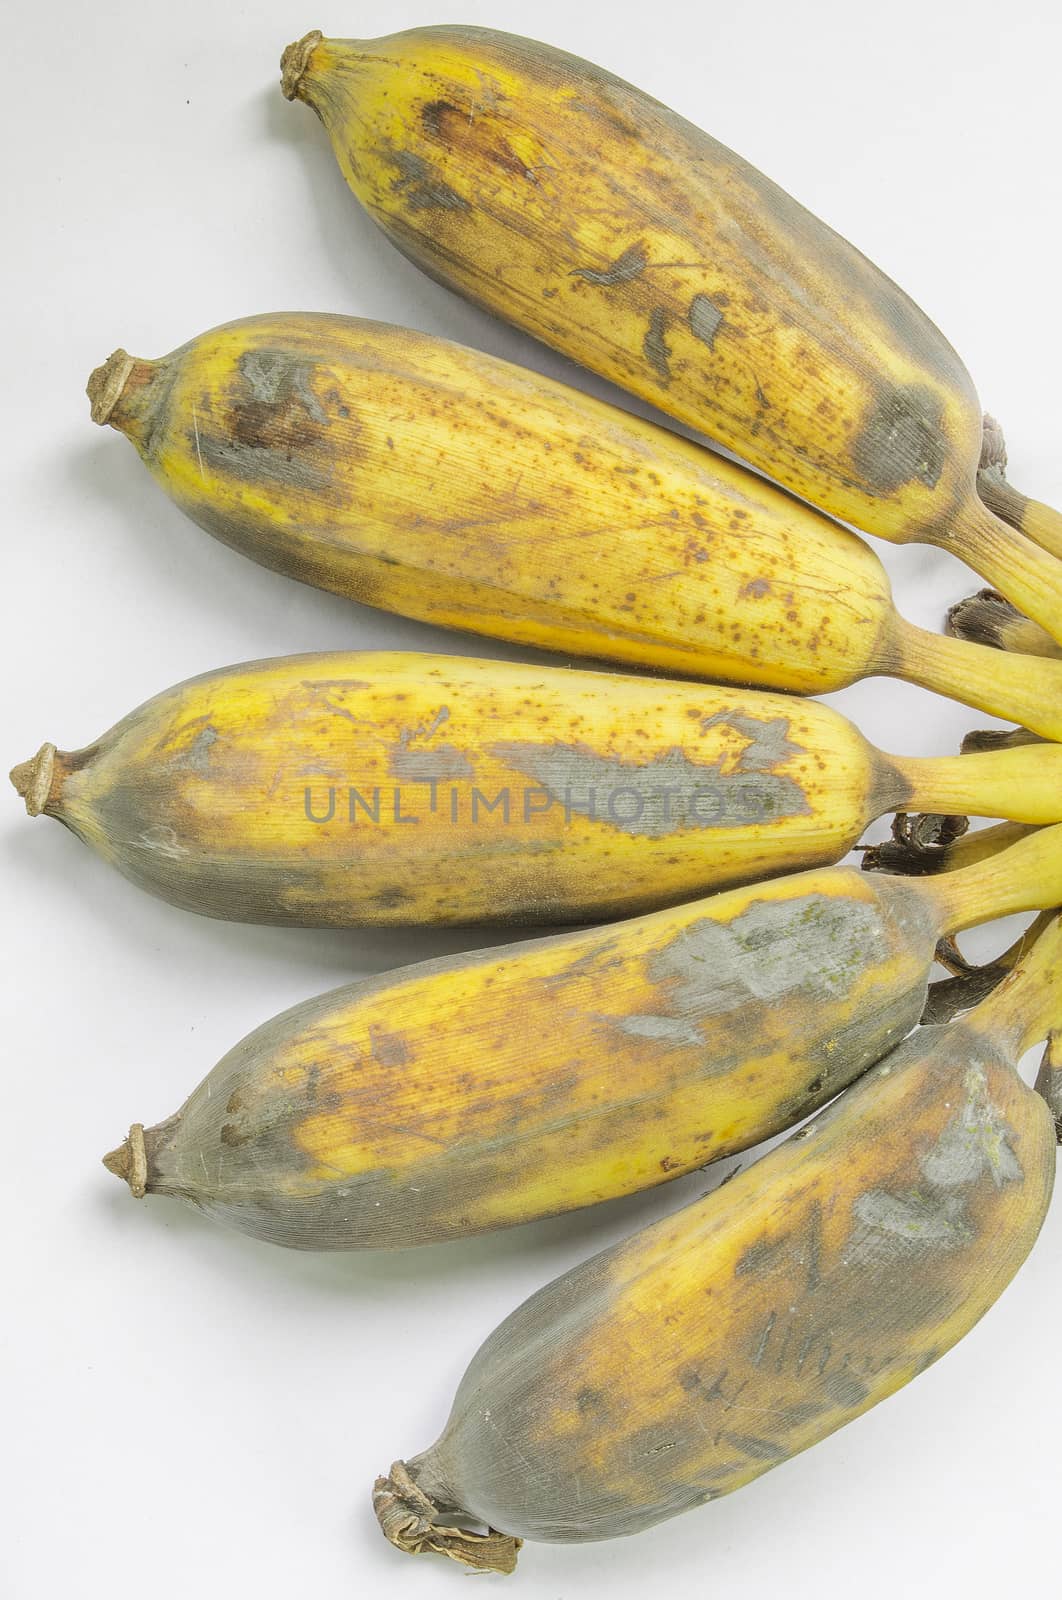 The Overripe Bananas on the White Background.